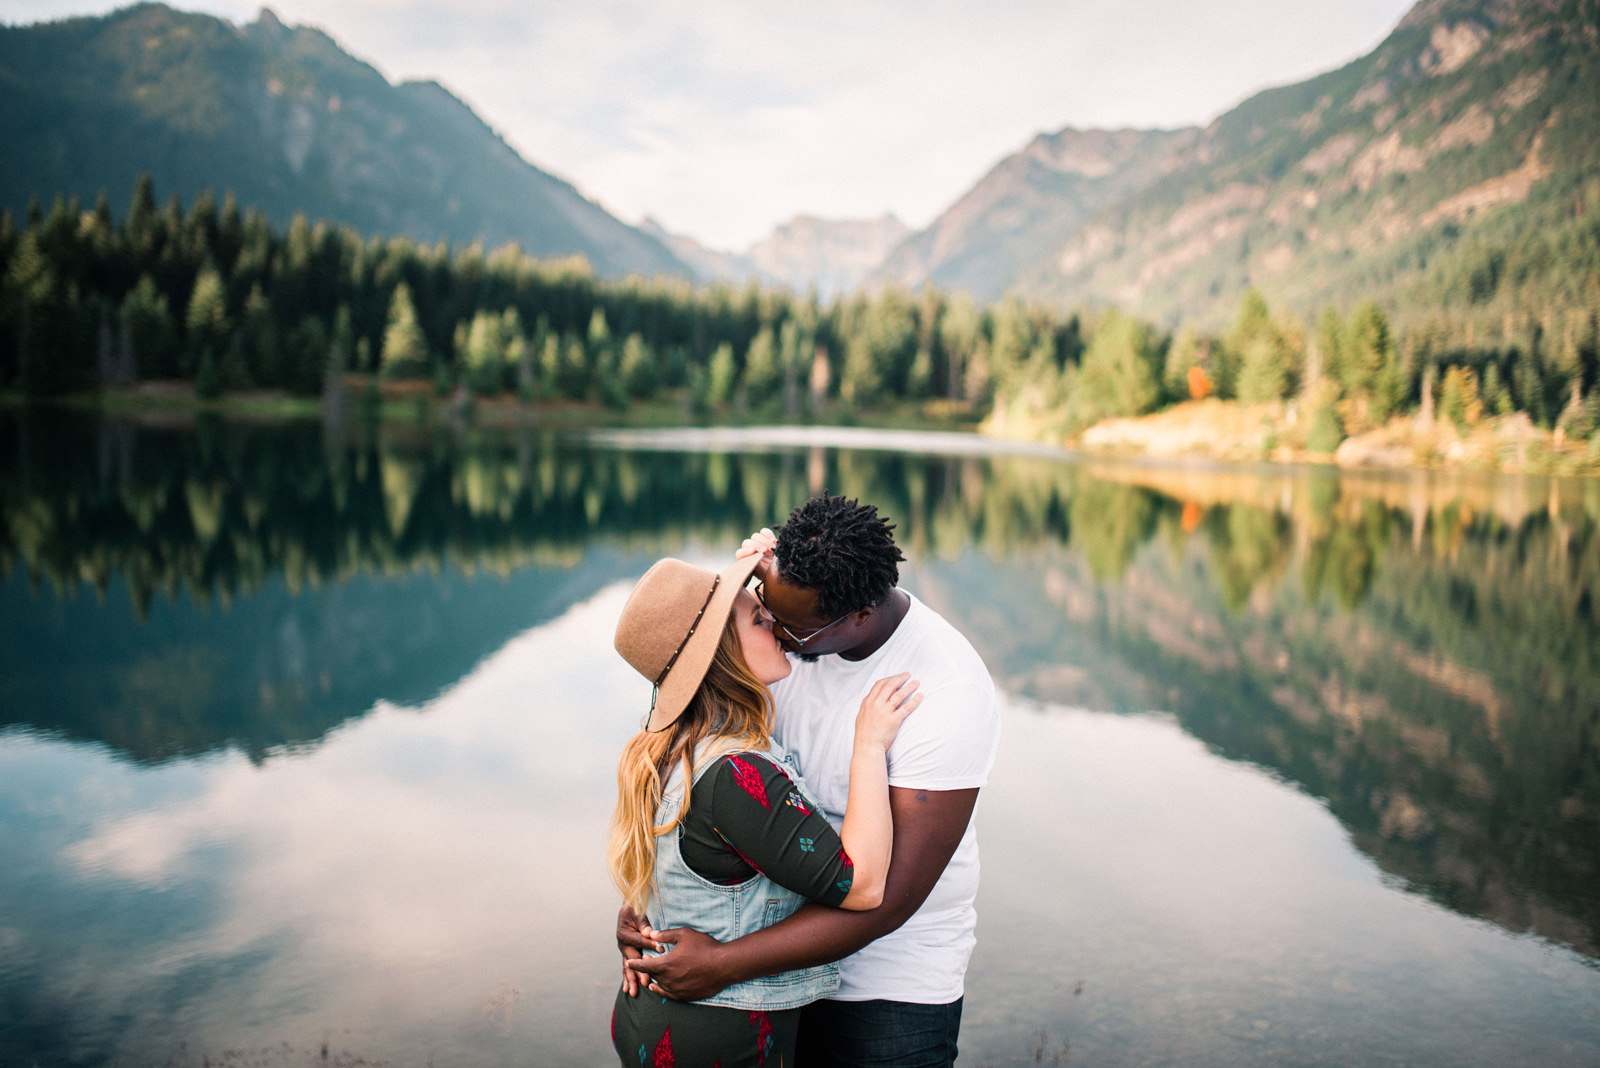 081-reflection-on-mountain-lake-engagement-session-at-snoqualmie-pass-on-film.jpg